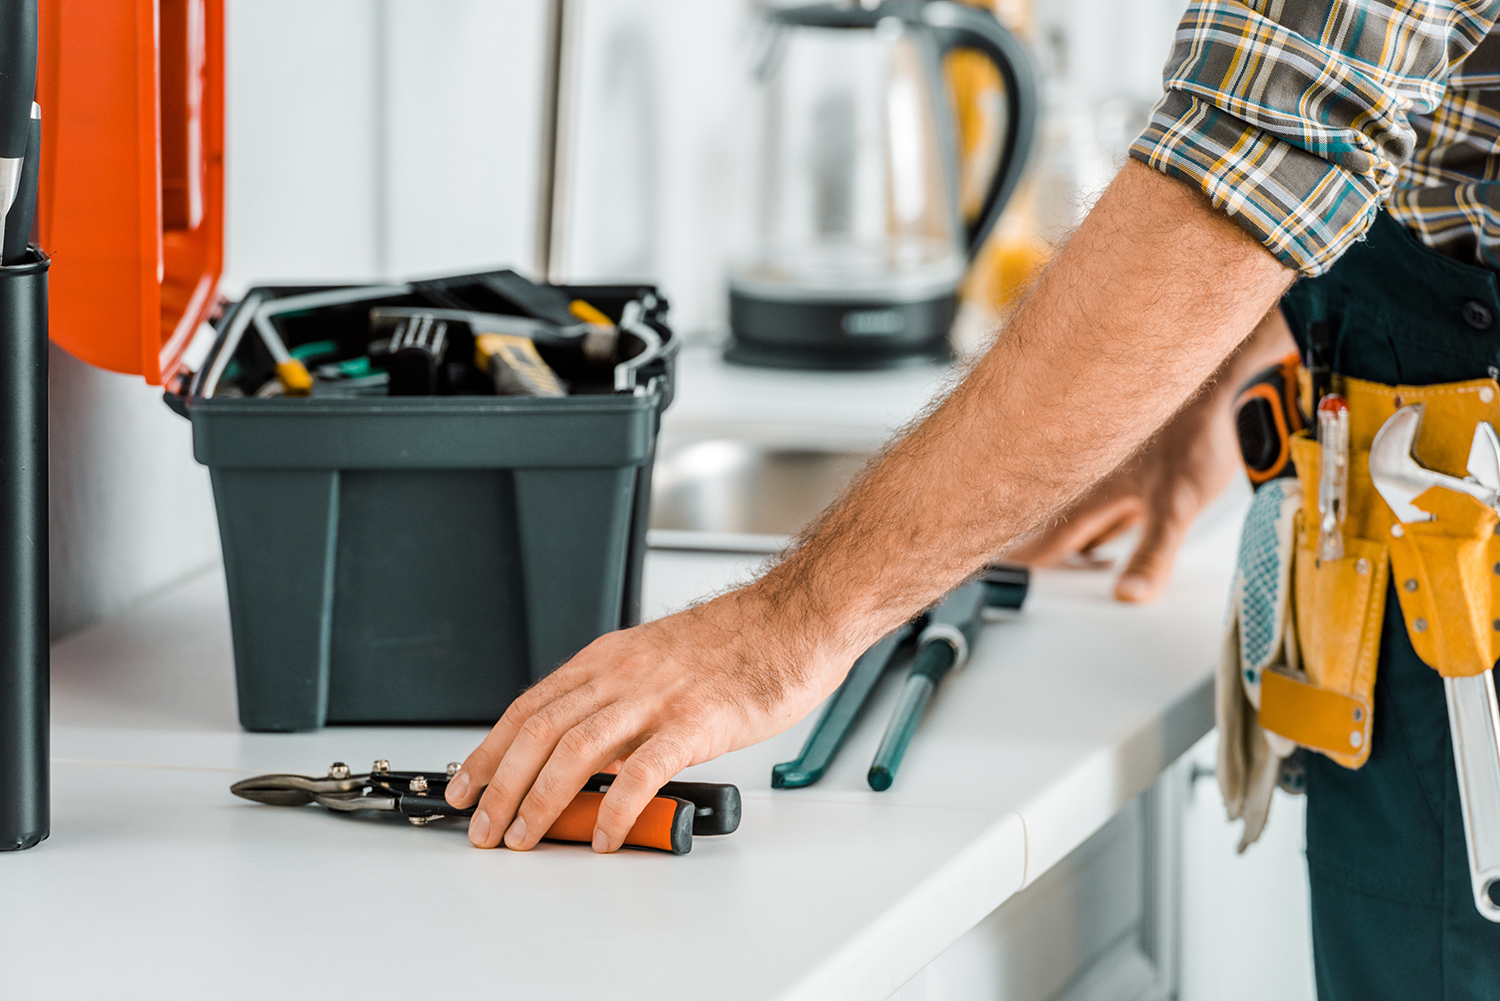 hotel maintenance technician with tool box on kitchenette counter